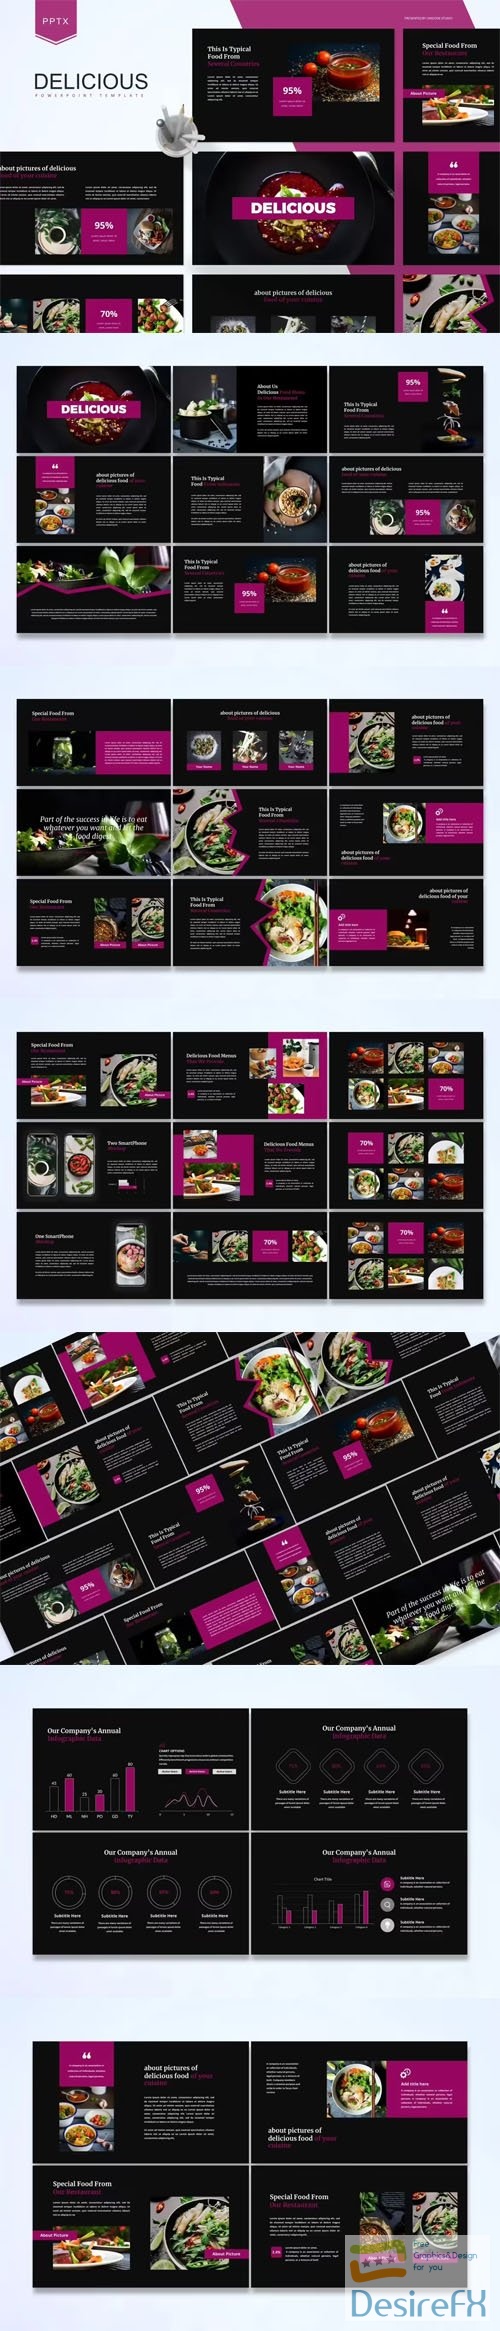 Delicious - Powerpoint Presentation Template